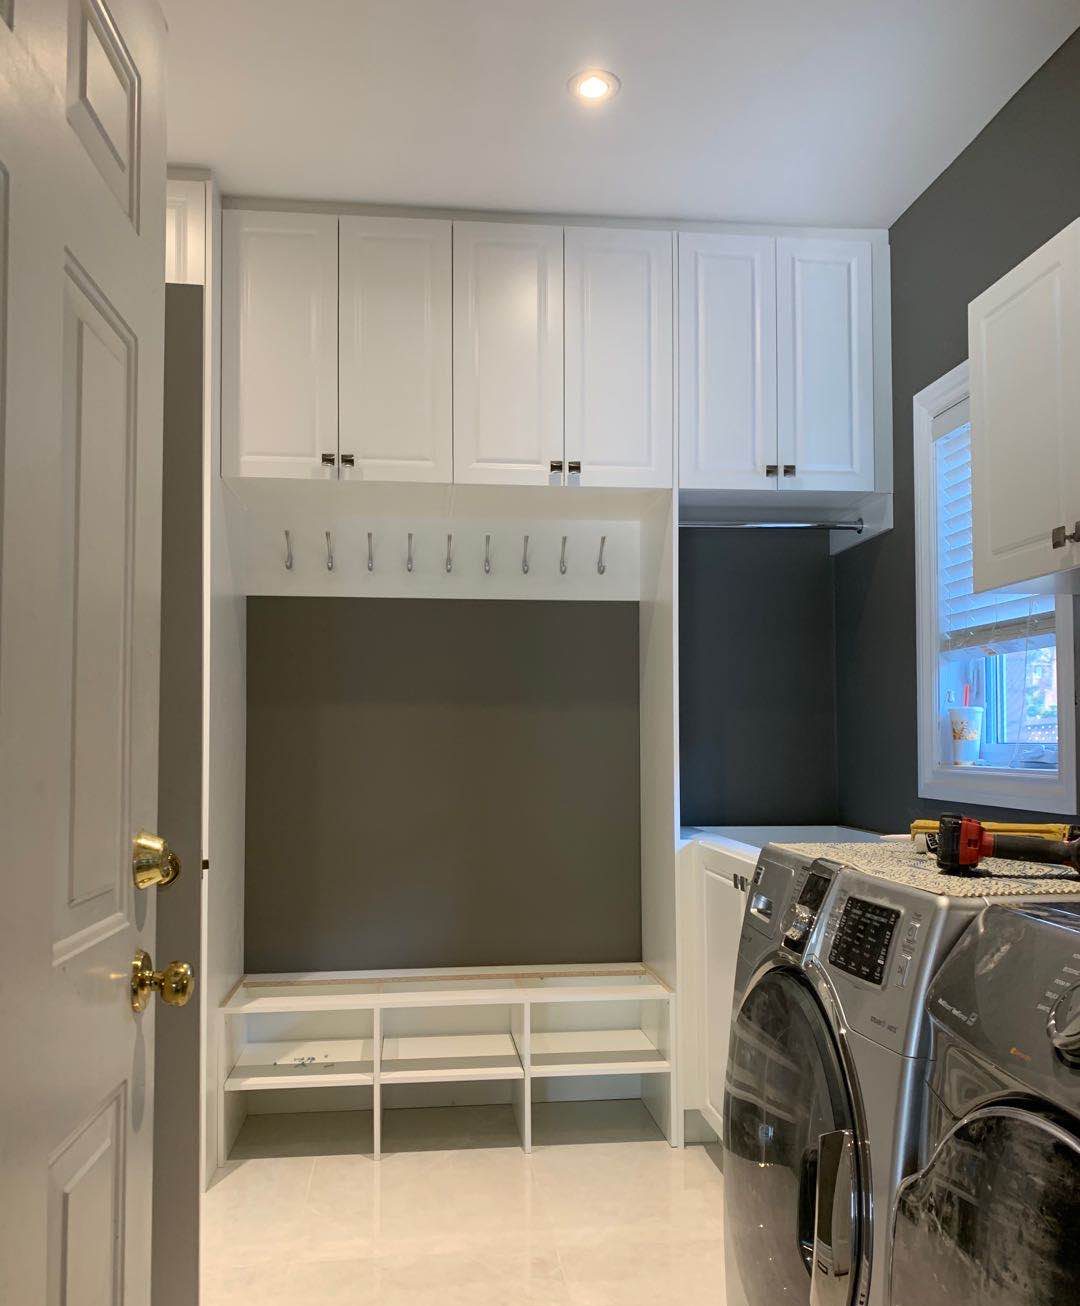 Laundry room cabinet